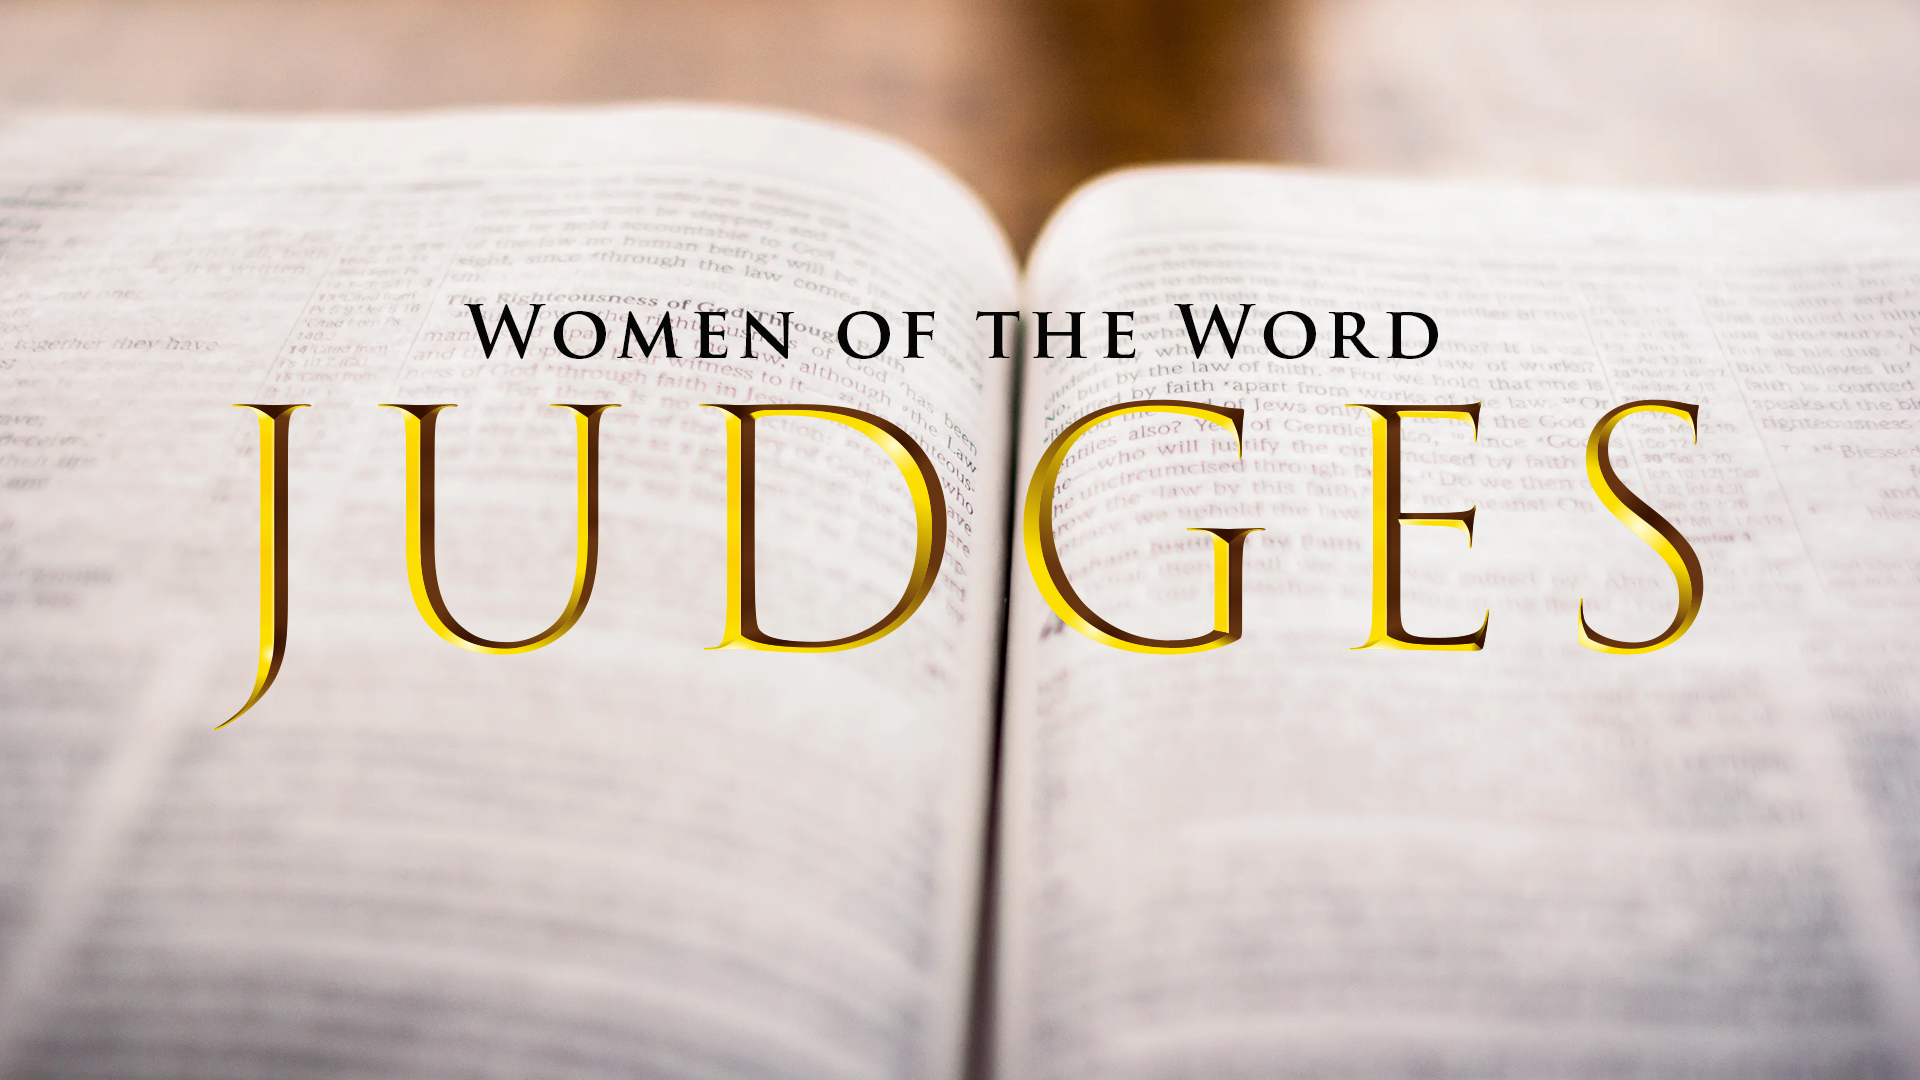 Women in the Word
Tuesdays, 2:30 p.m., Room 114

Beginning March 8, we'll continue our exploration of the Book of Judges.
